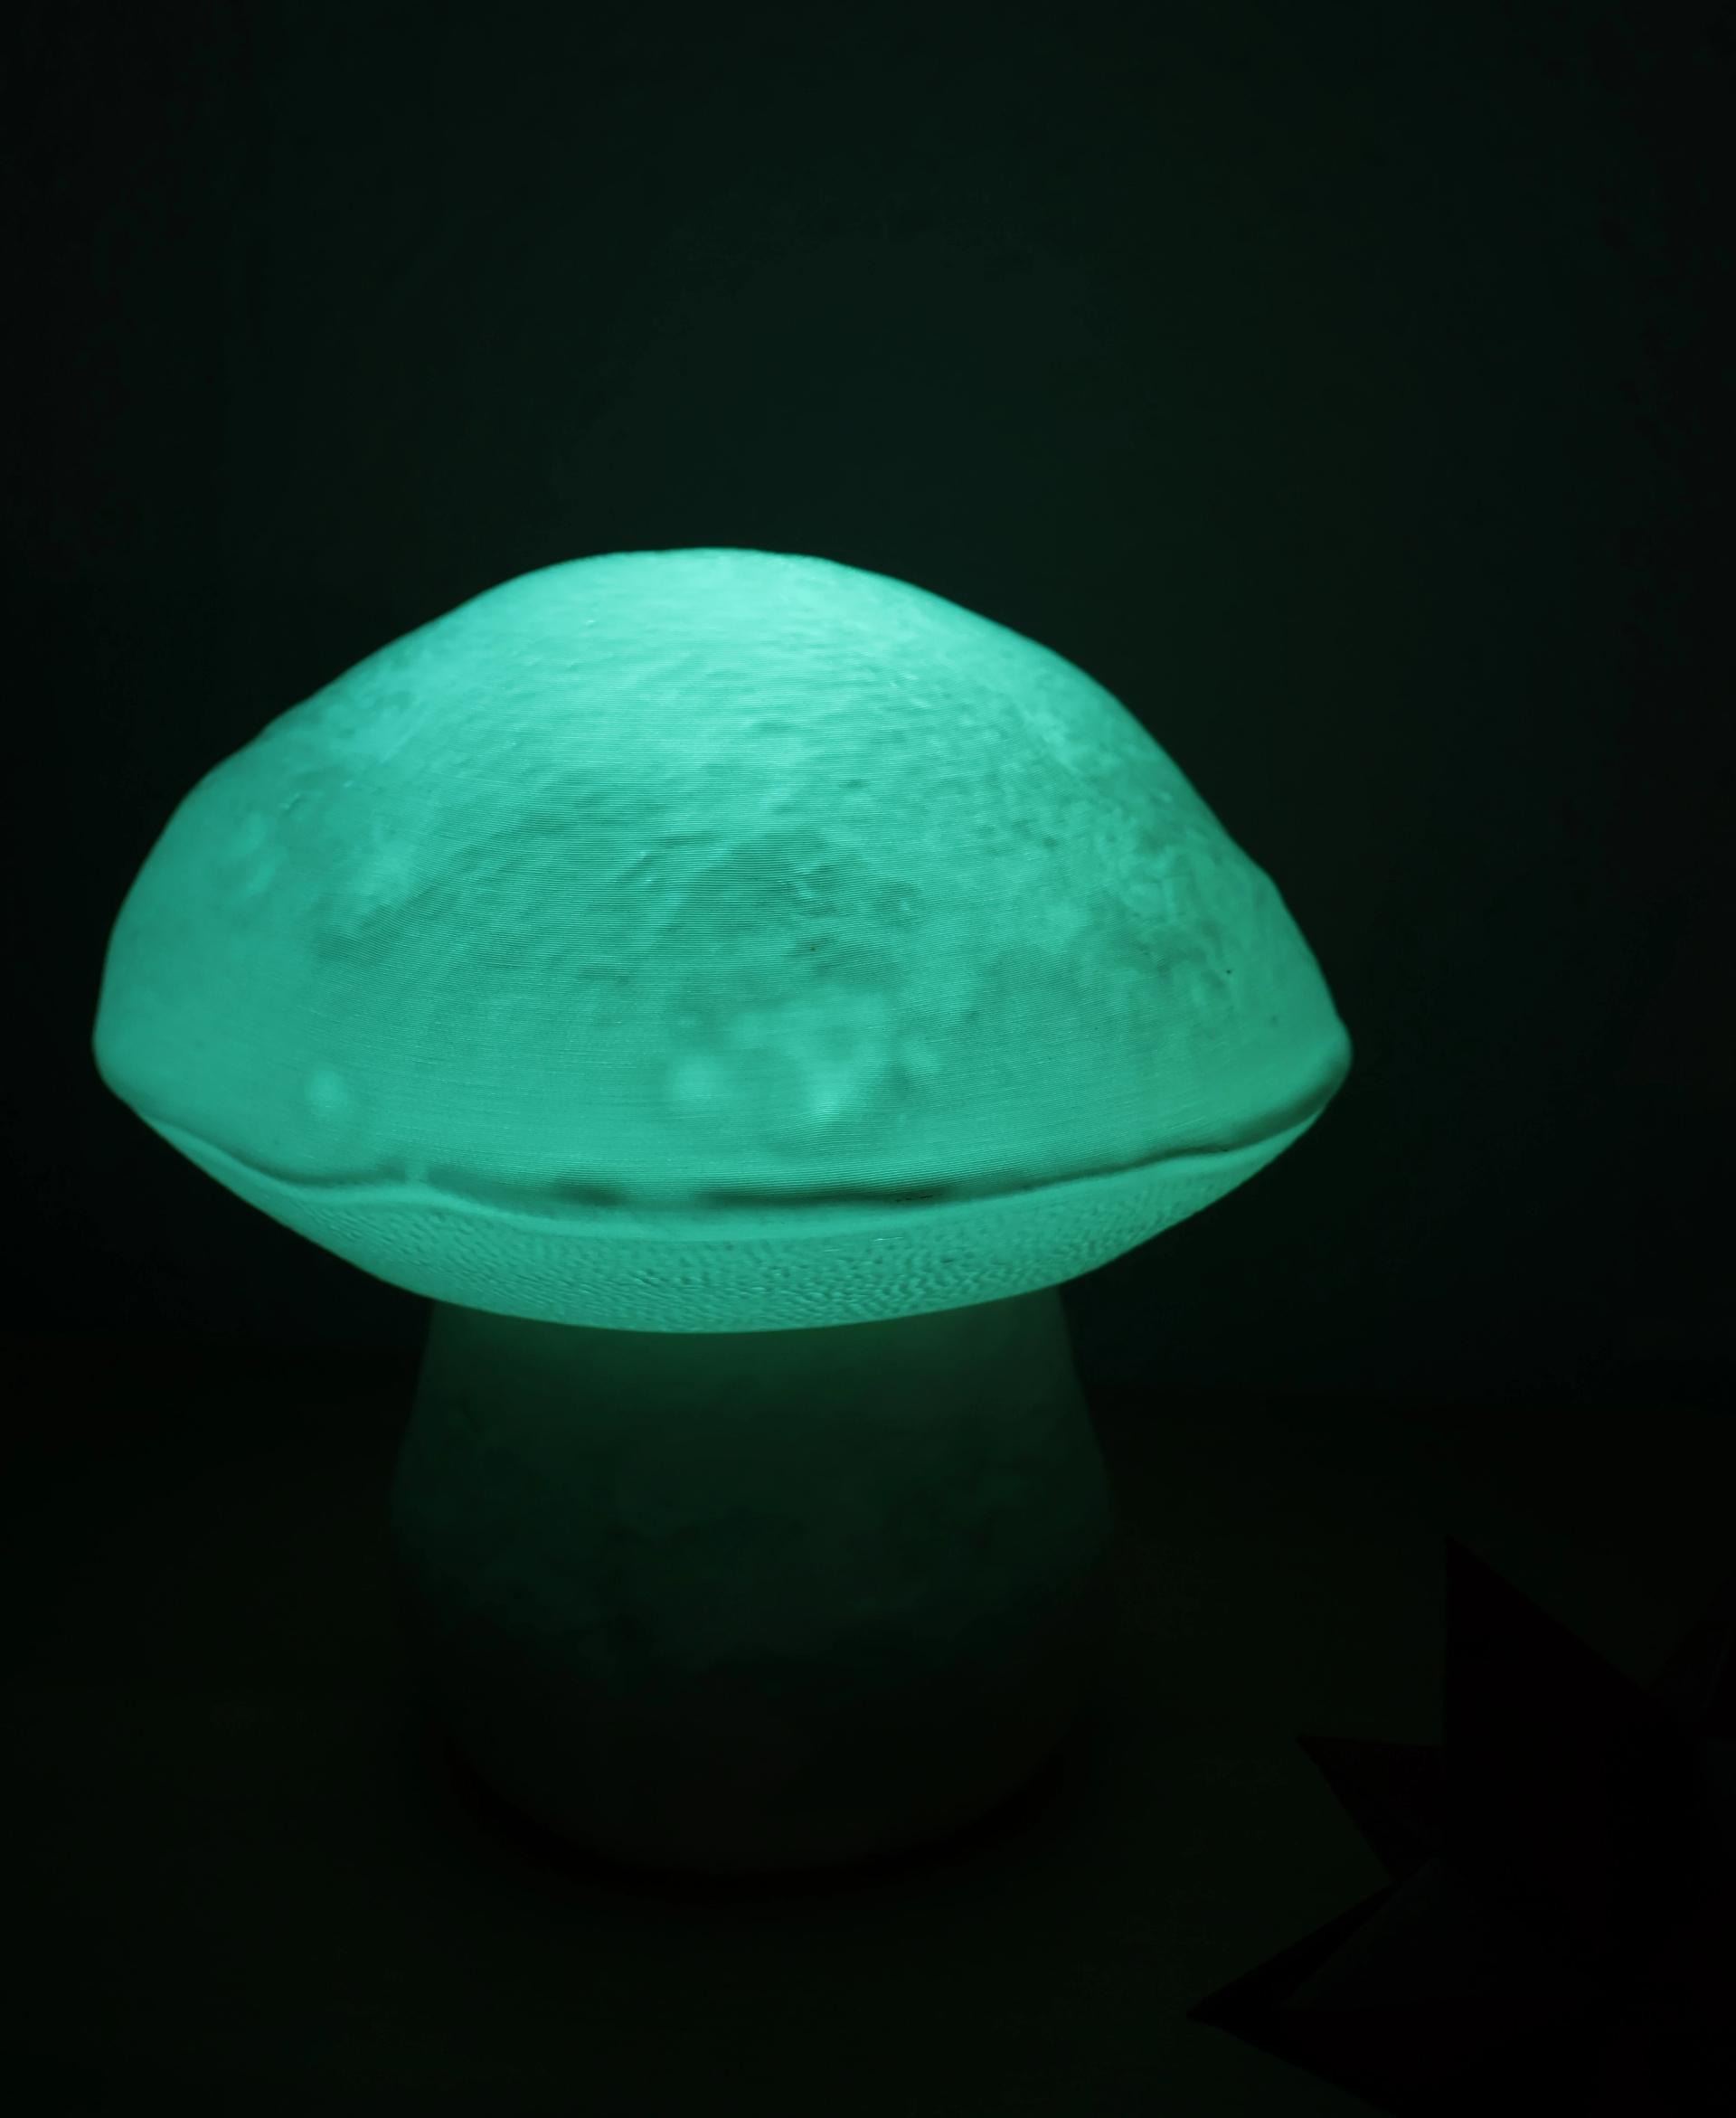 Table lamp “Edulis Fungus” organic - Lamp turned out awesome!
Well, I found out how to upload videos :] - 3d model